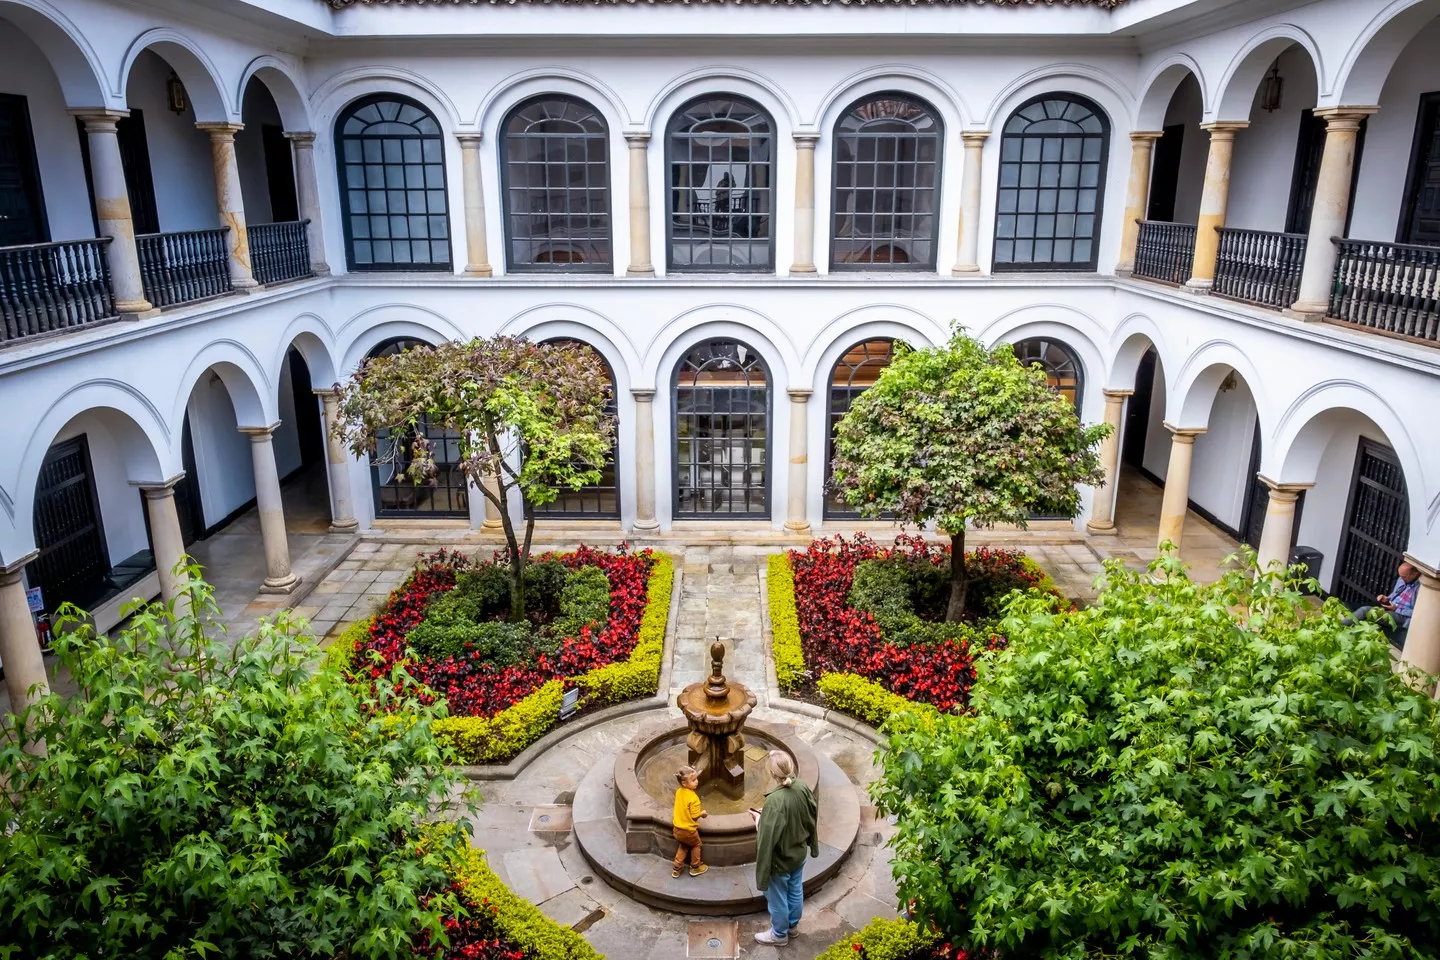 Botero Museum in Colombia, South America | Museums - Rated 4.2